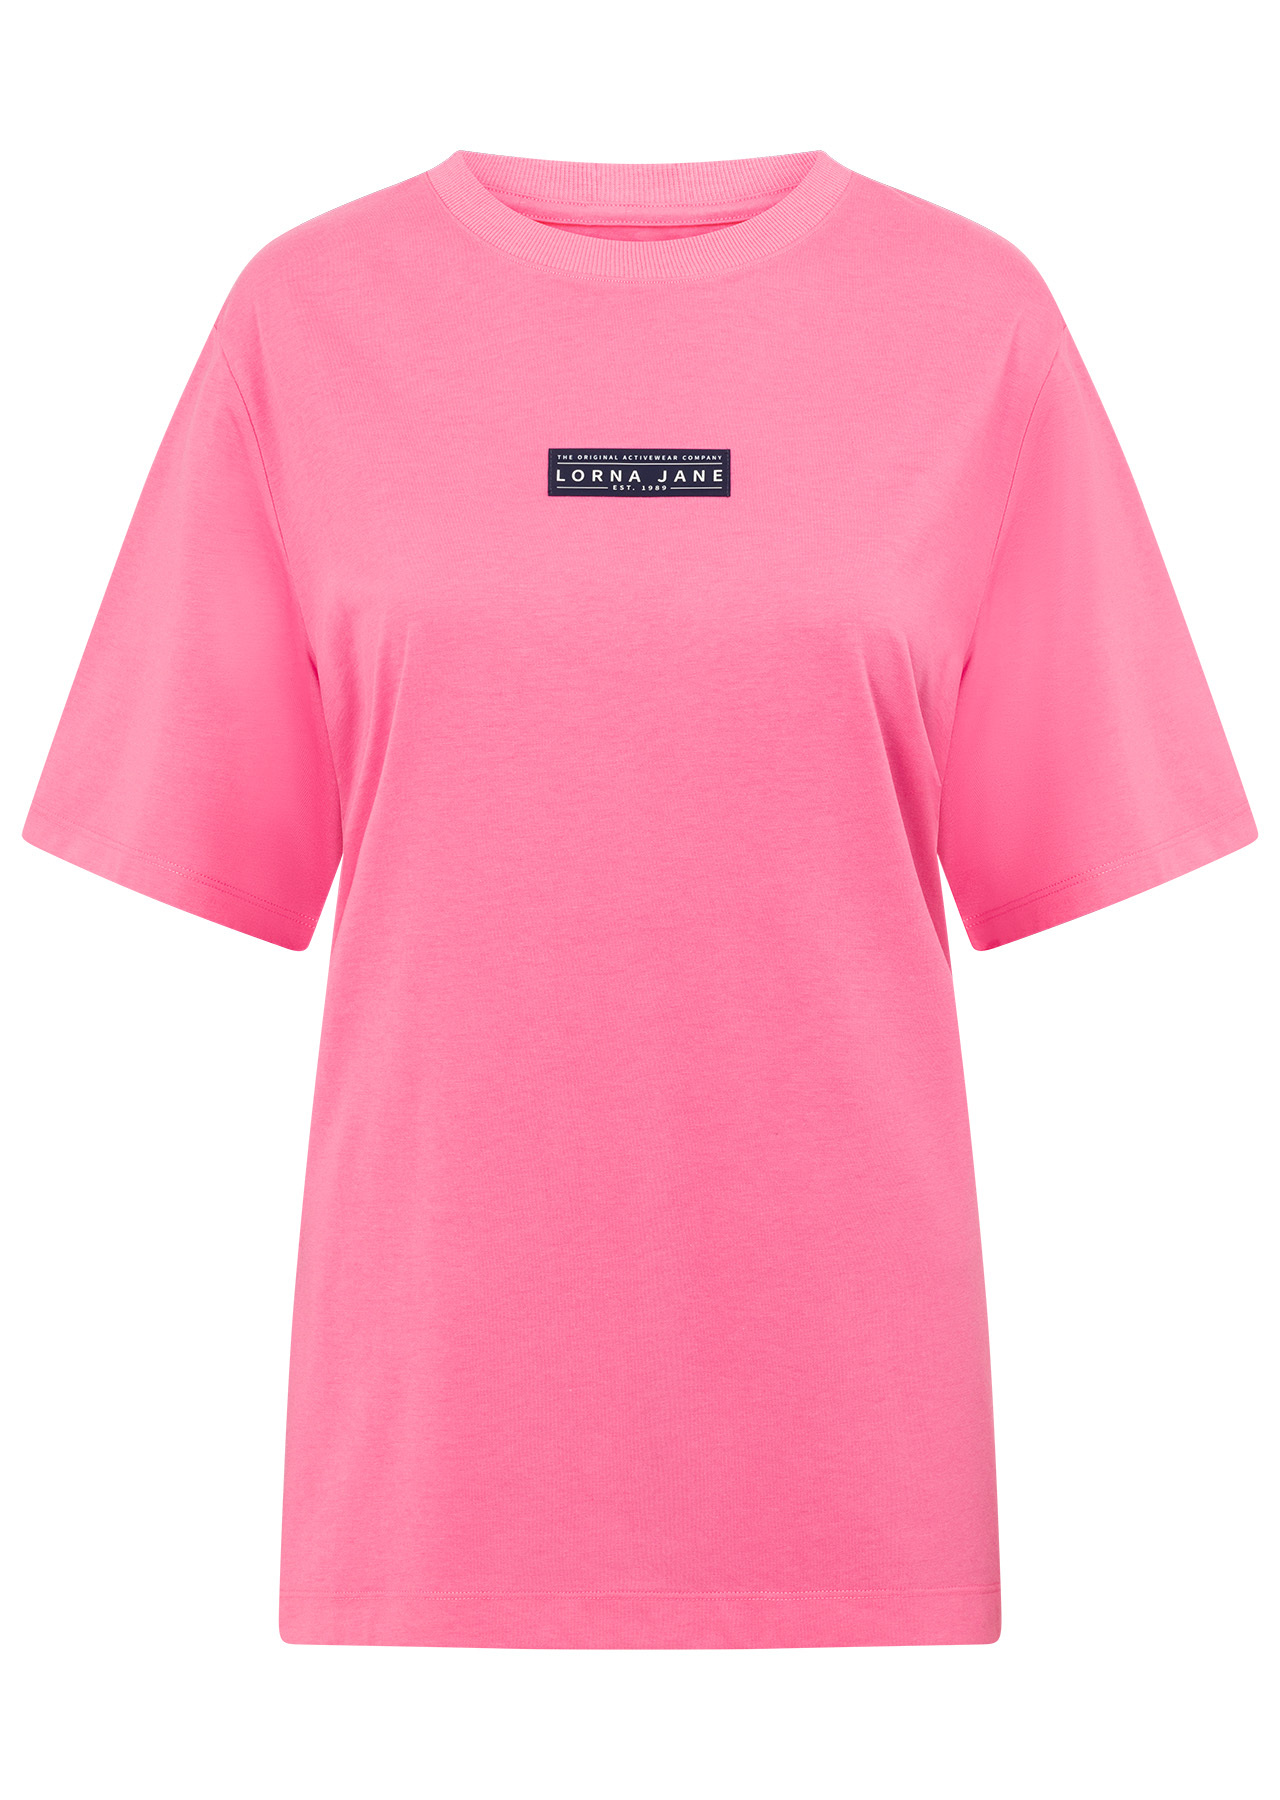 Regroup Relaxed Tee | Lorna Jane SG